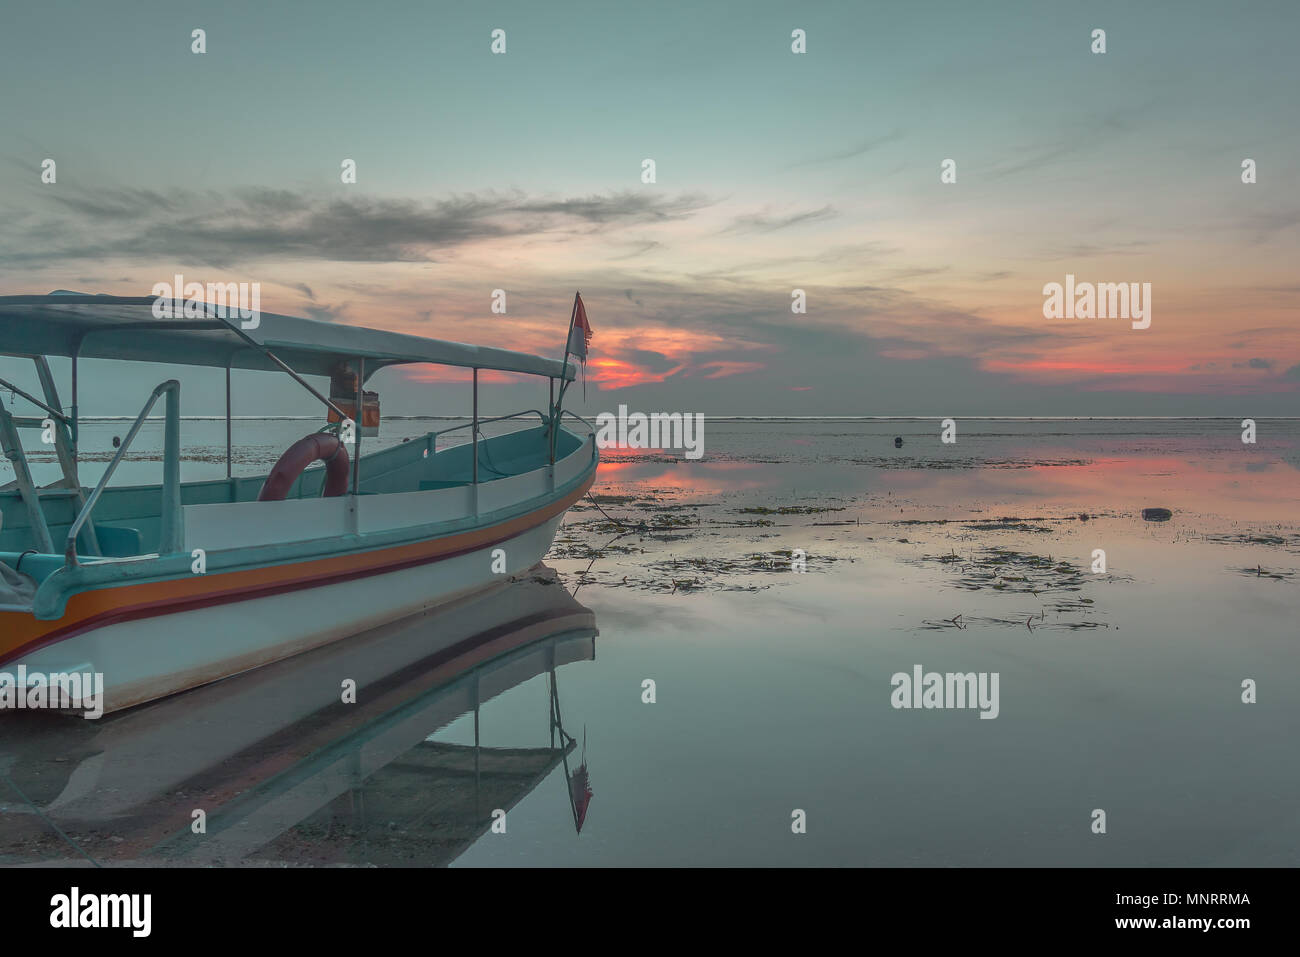 A small indonesian passenger boat at sunrise, reflections in the water, Sanur, Bali, Indonesia, April 21, 2018 Stock Photo